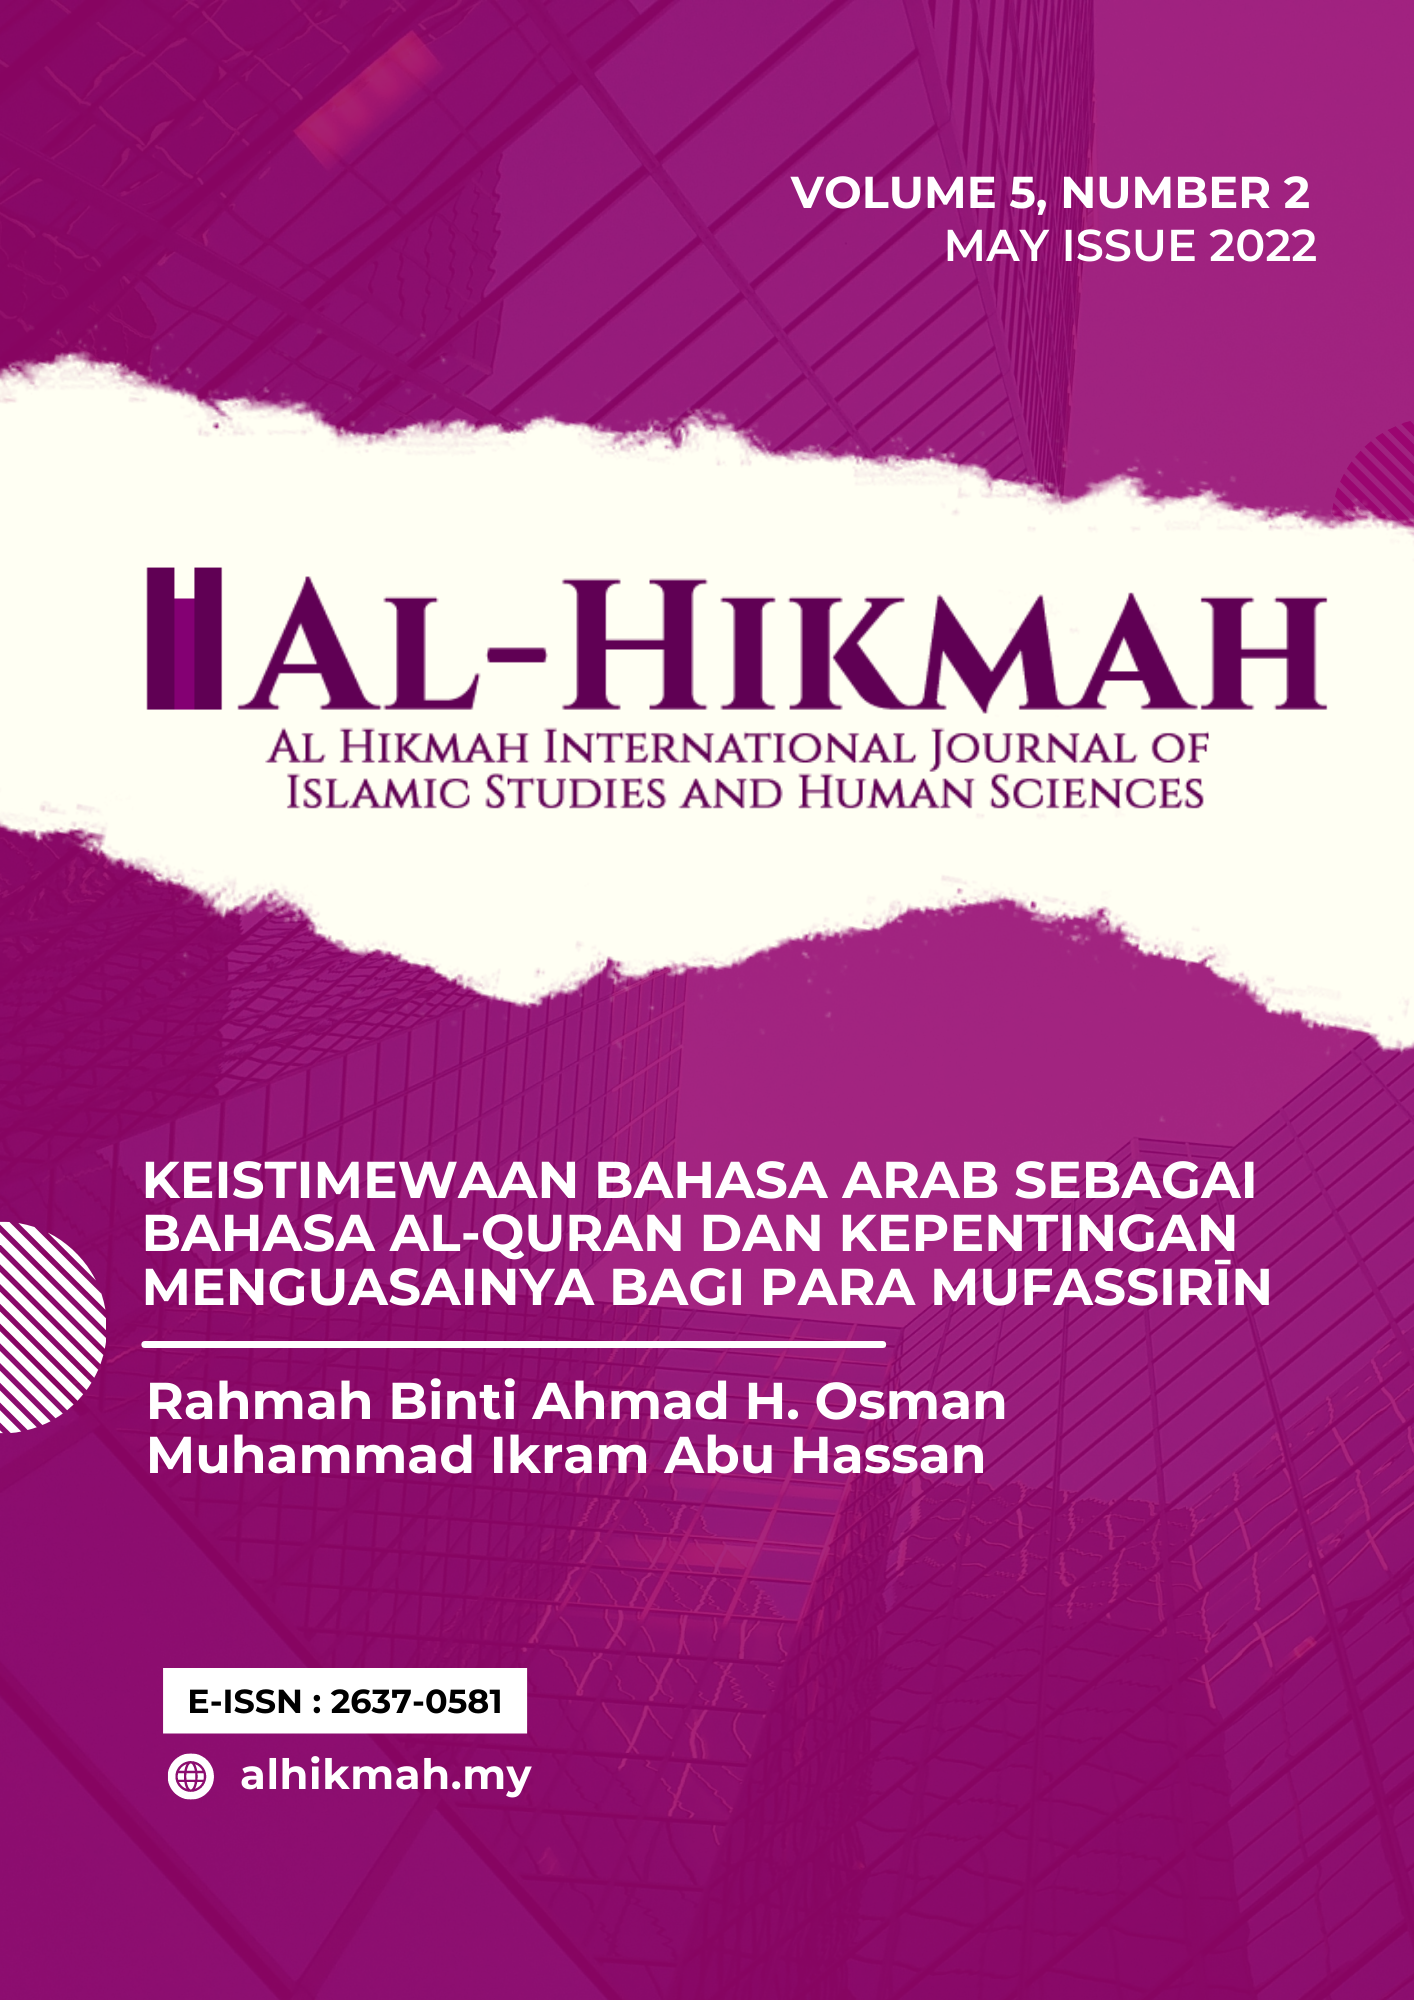 The May 2022 issue of the Journal of Islamic Studies and Human Sciences is now available online!